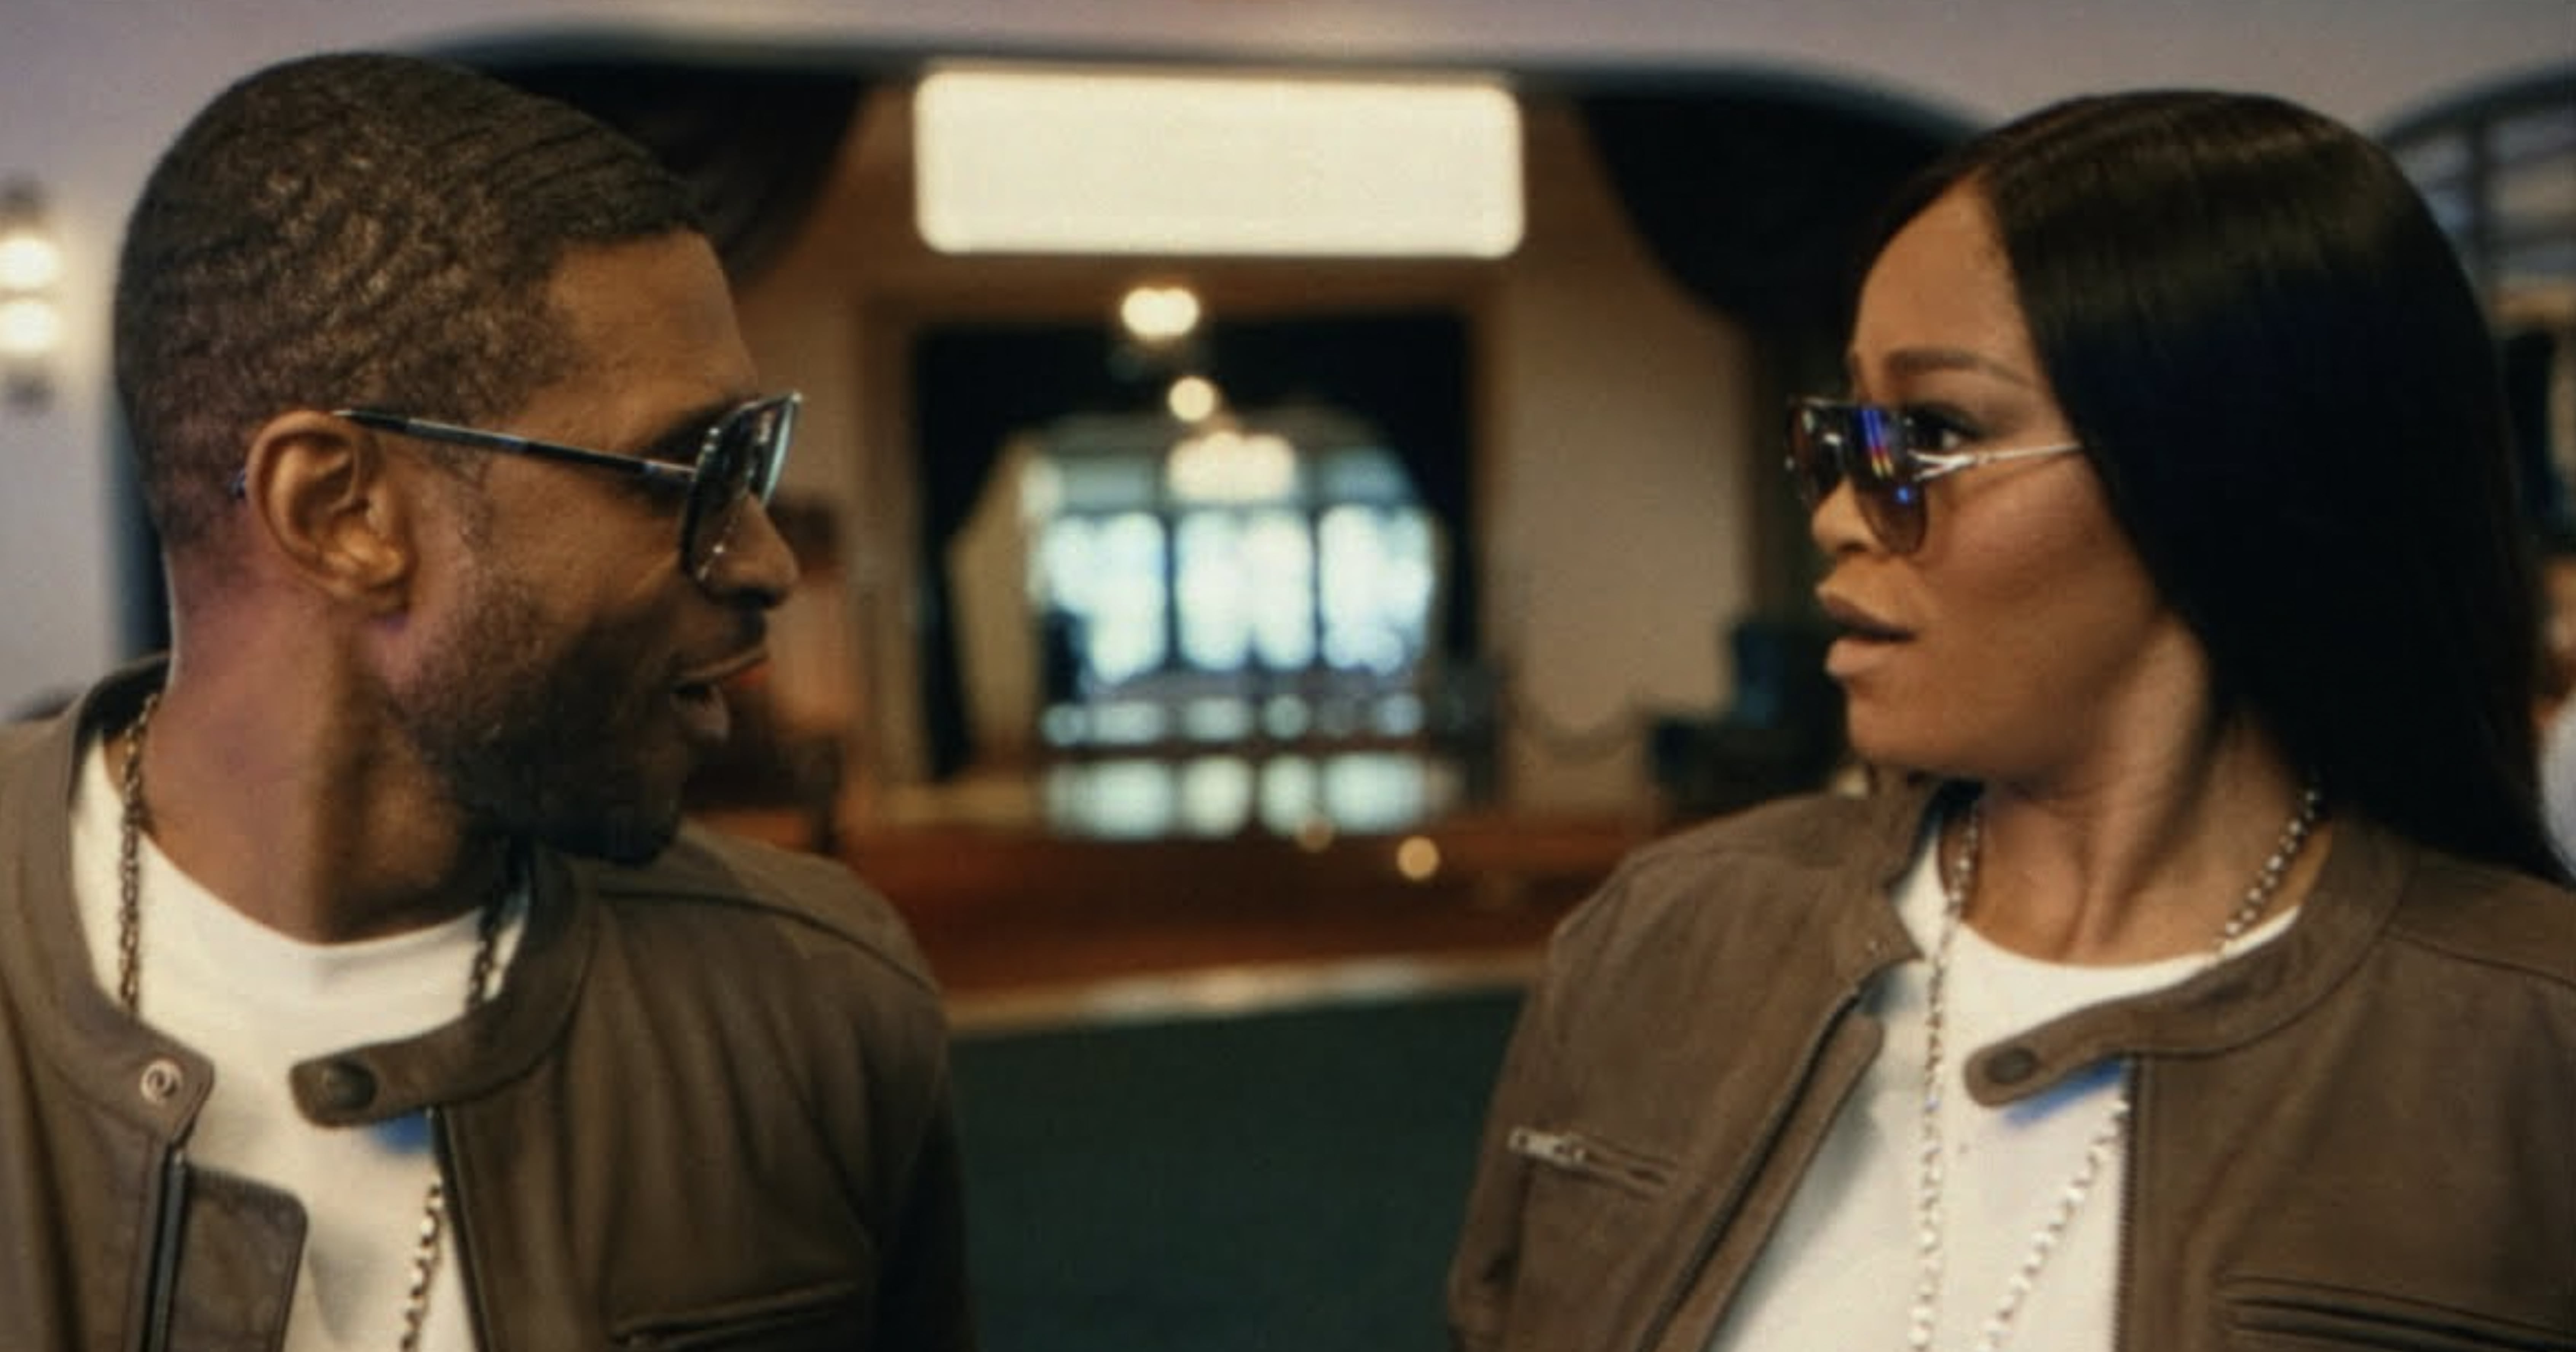 Usher and Keke Palmer Team Up For “Boyfriend” Video: “When Fantasies Become Reality”